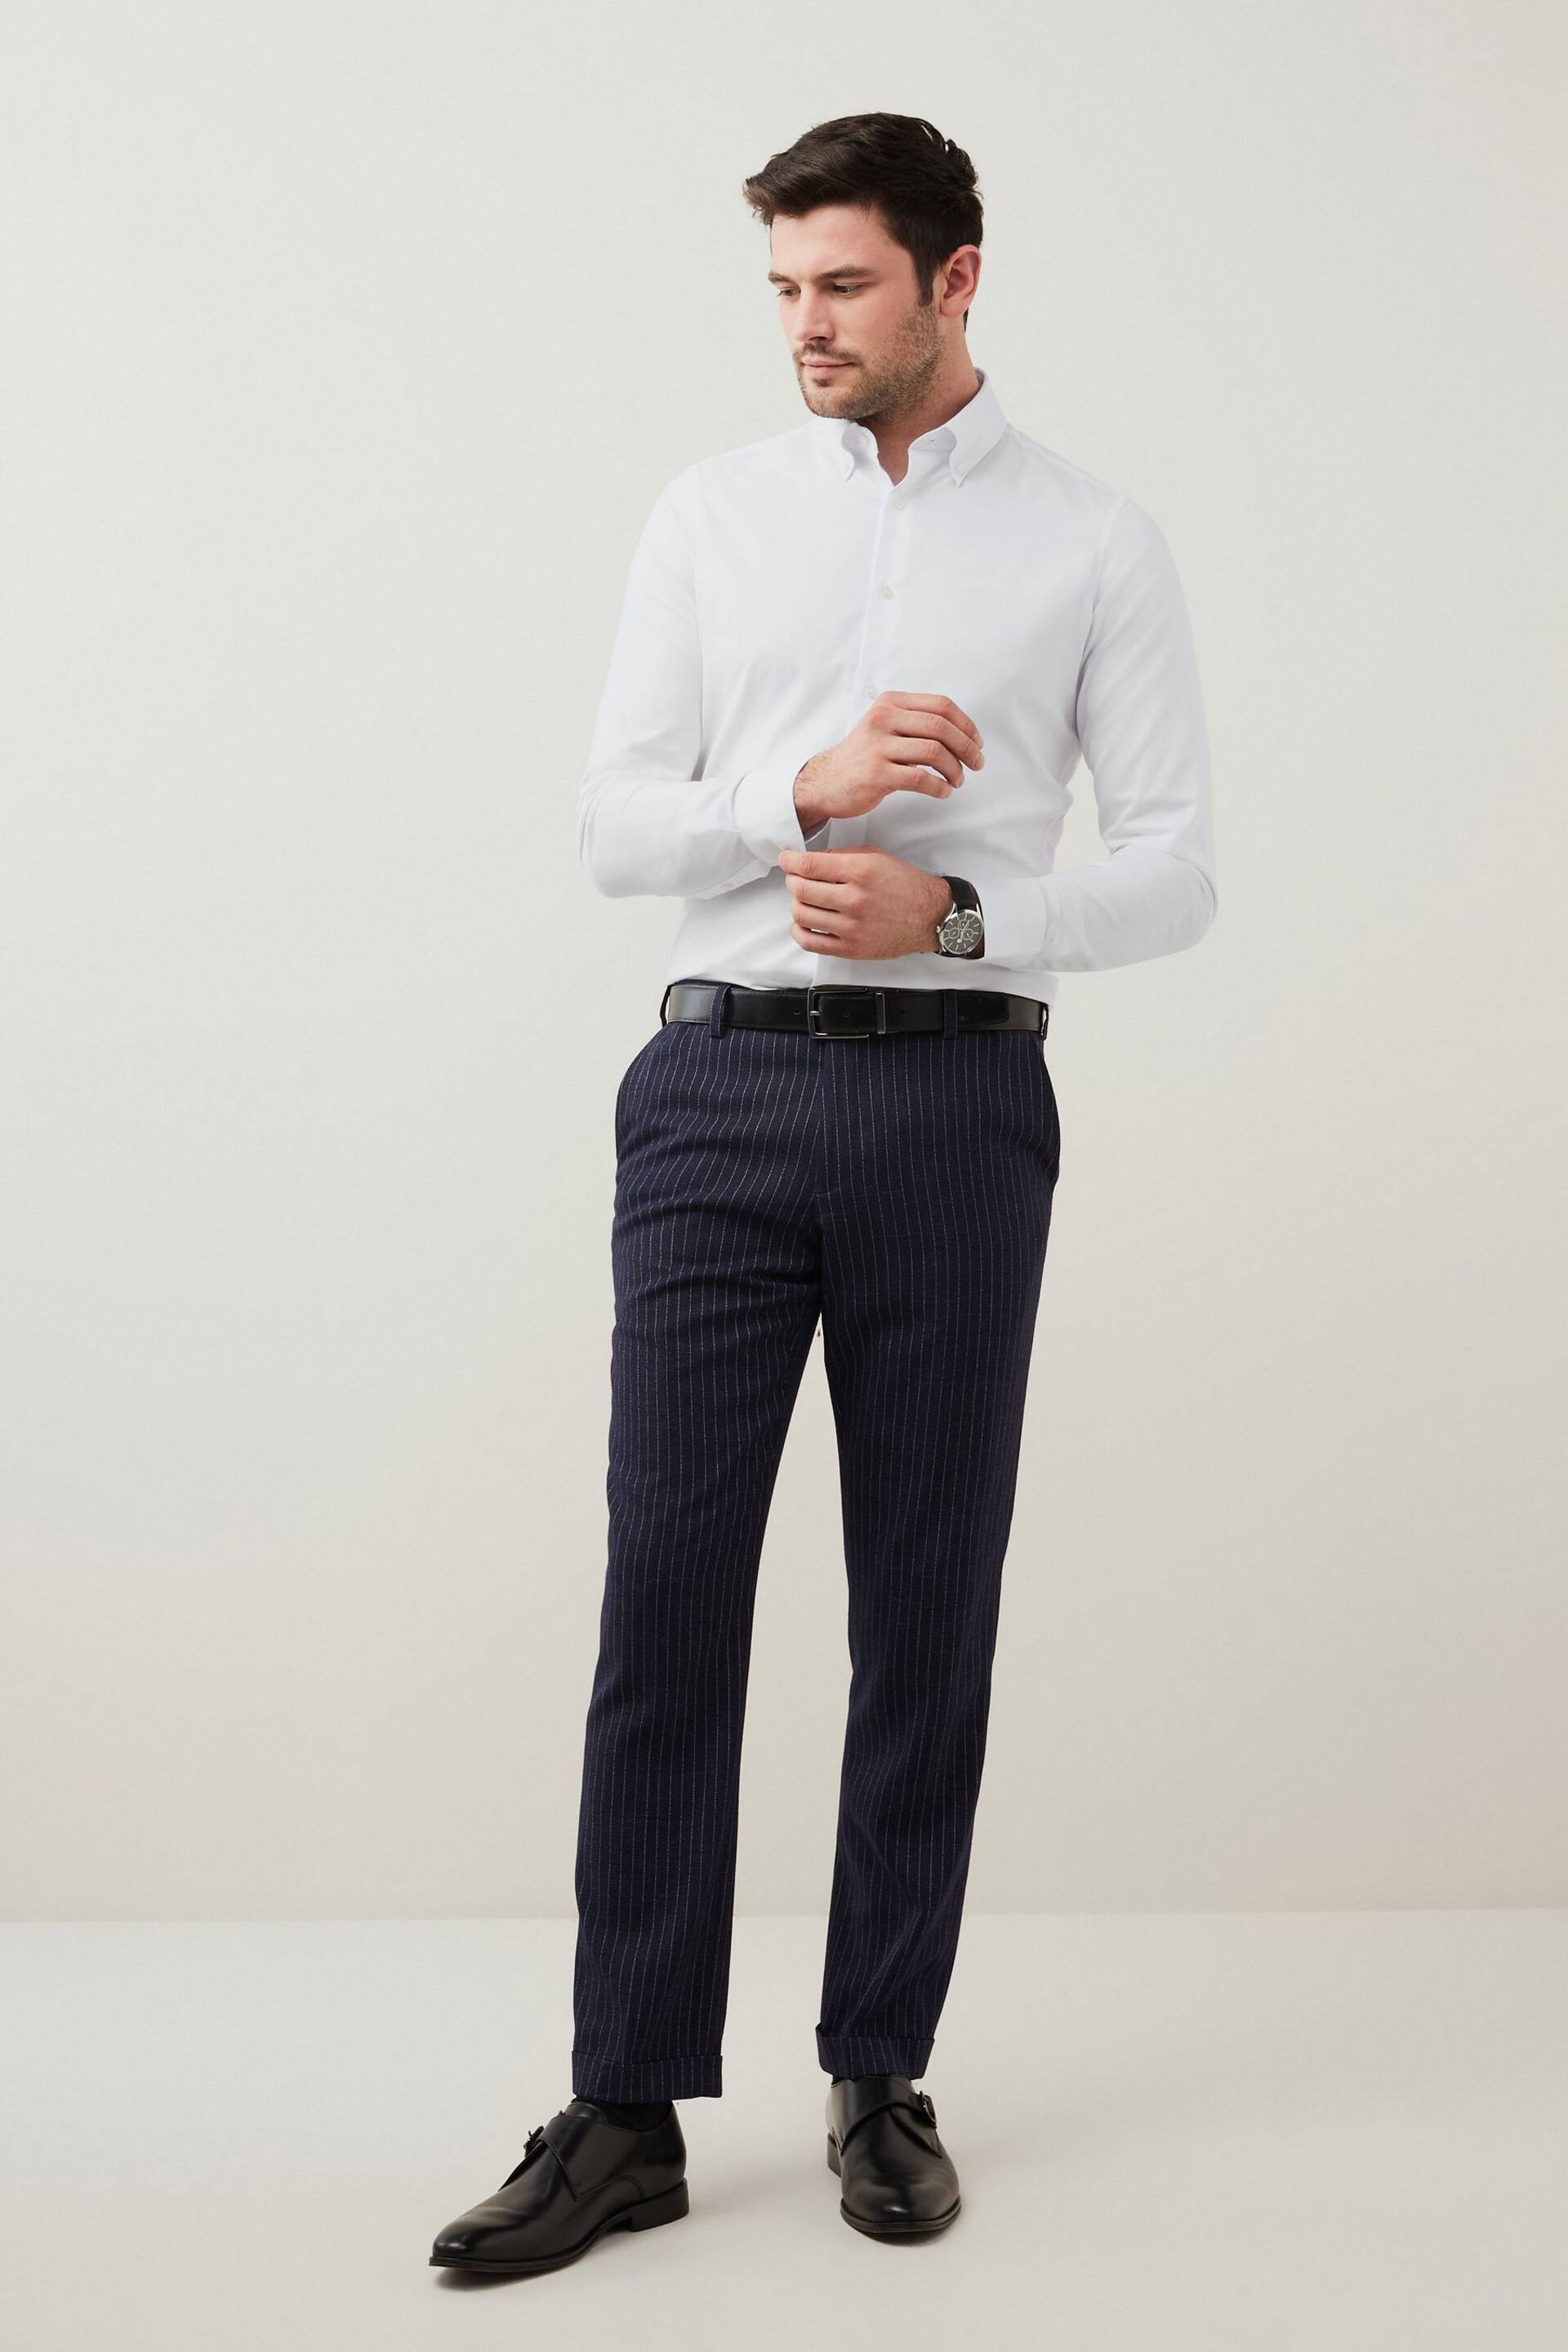 White Skinny Fit Easy Care Single Cuff Oxford Shirt - Image 1 of 9